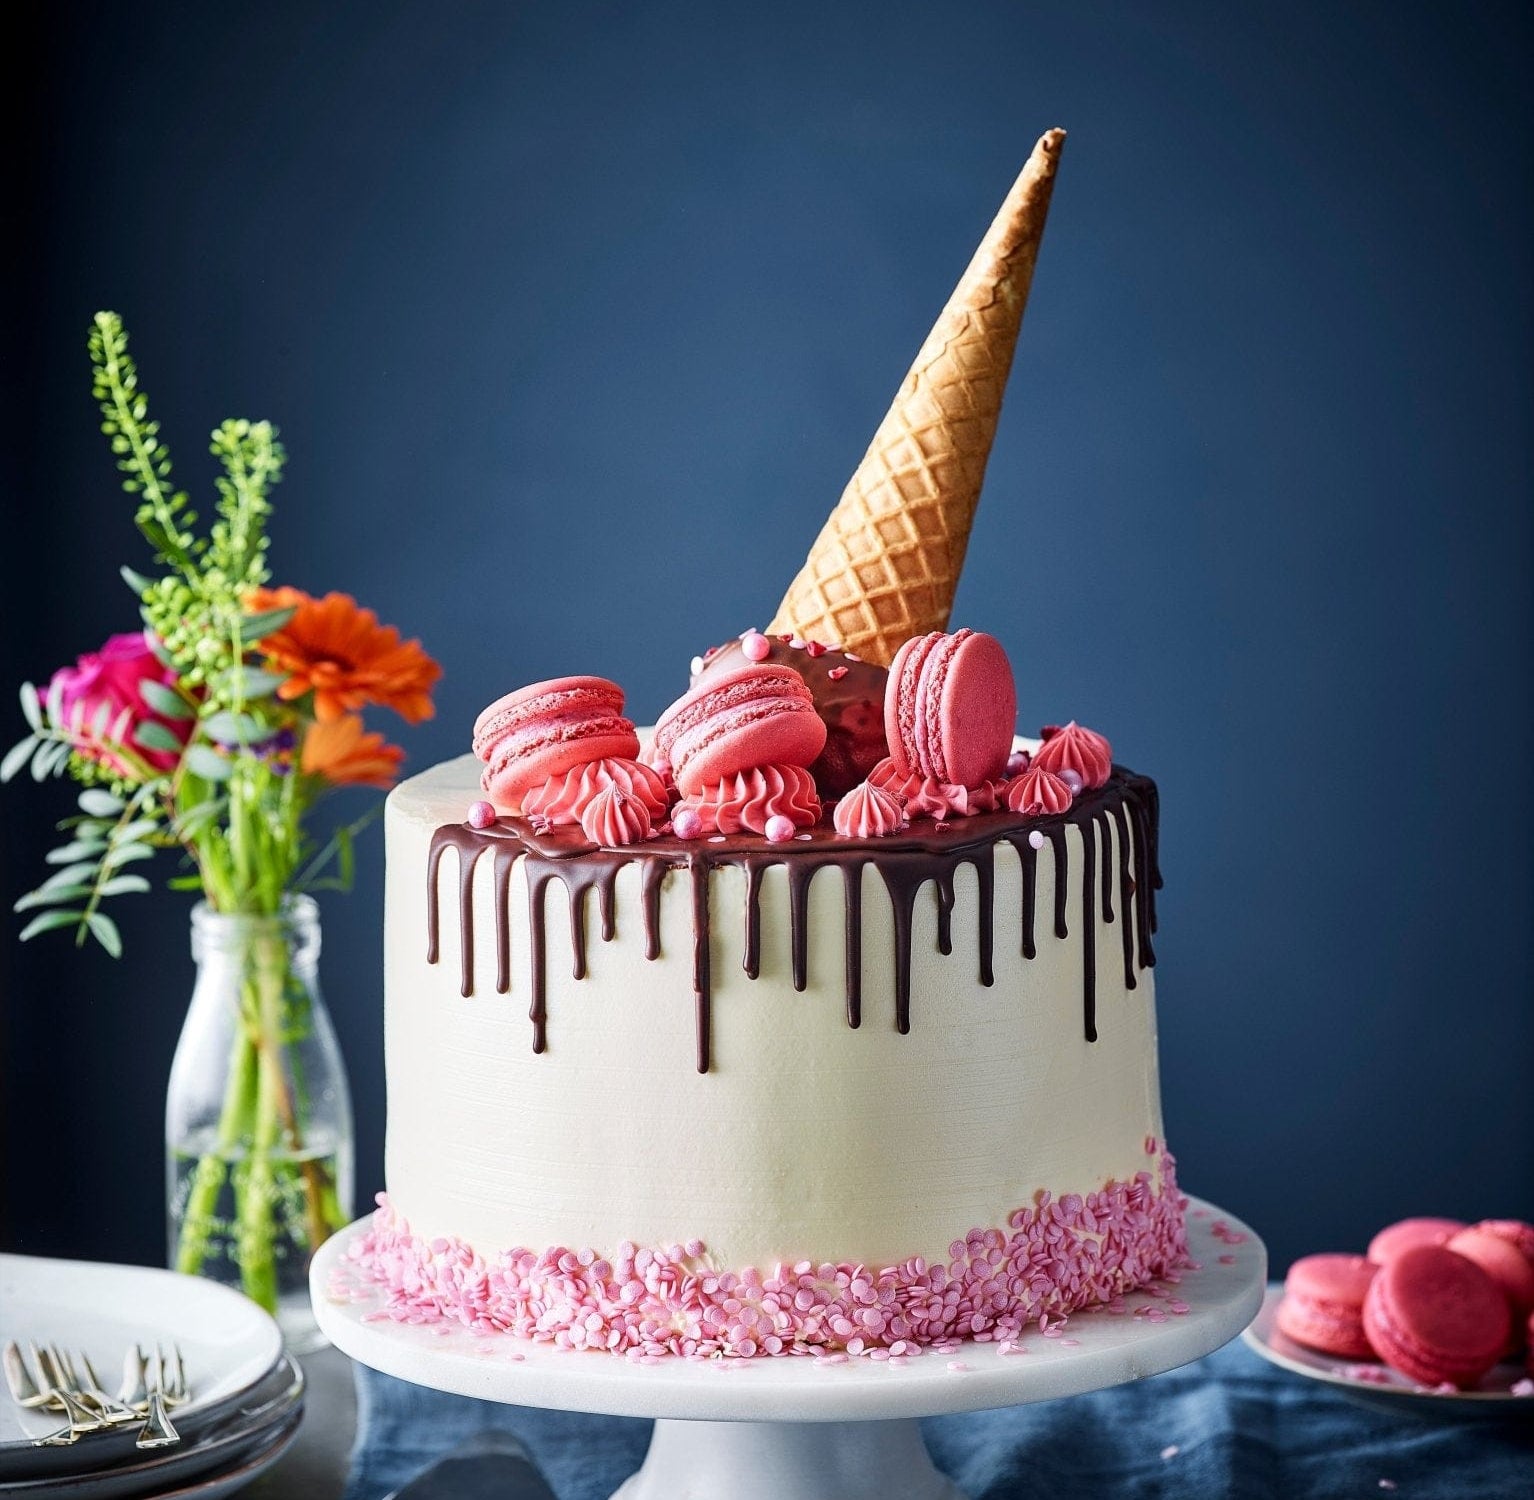 send cakes to India Online | Order cakes online, Cake online, Cake